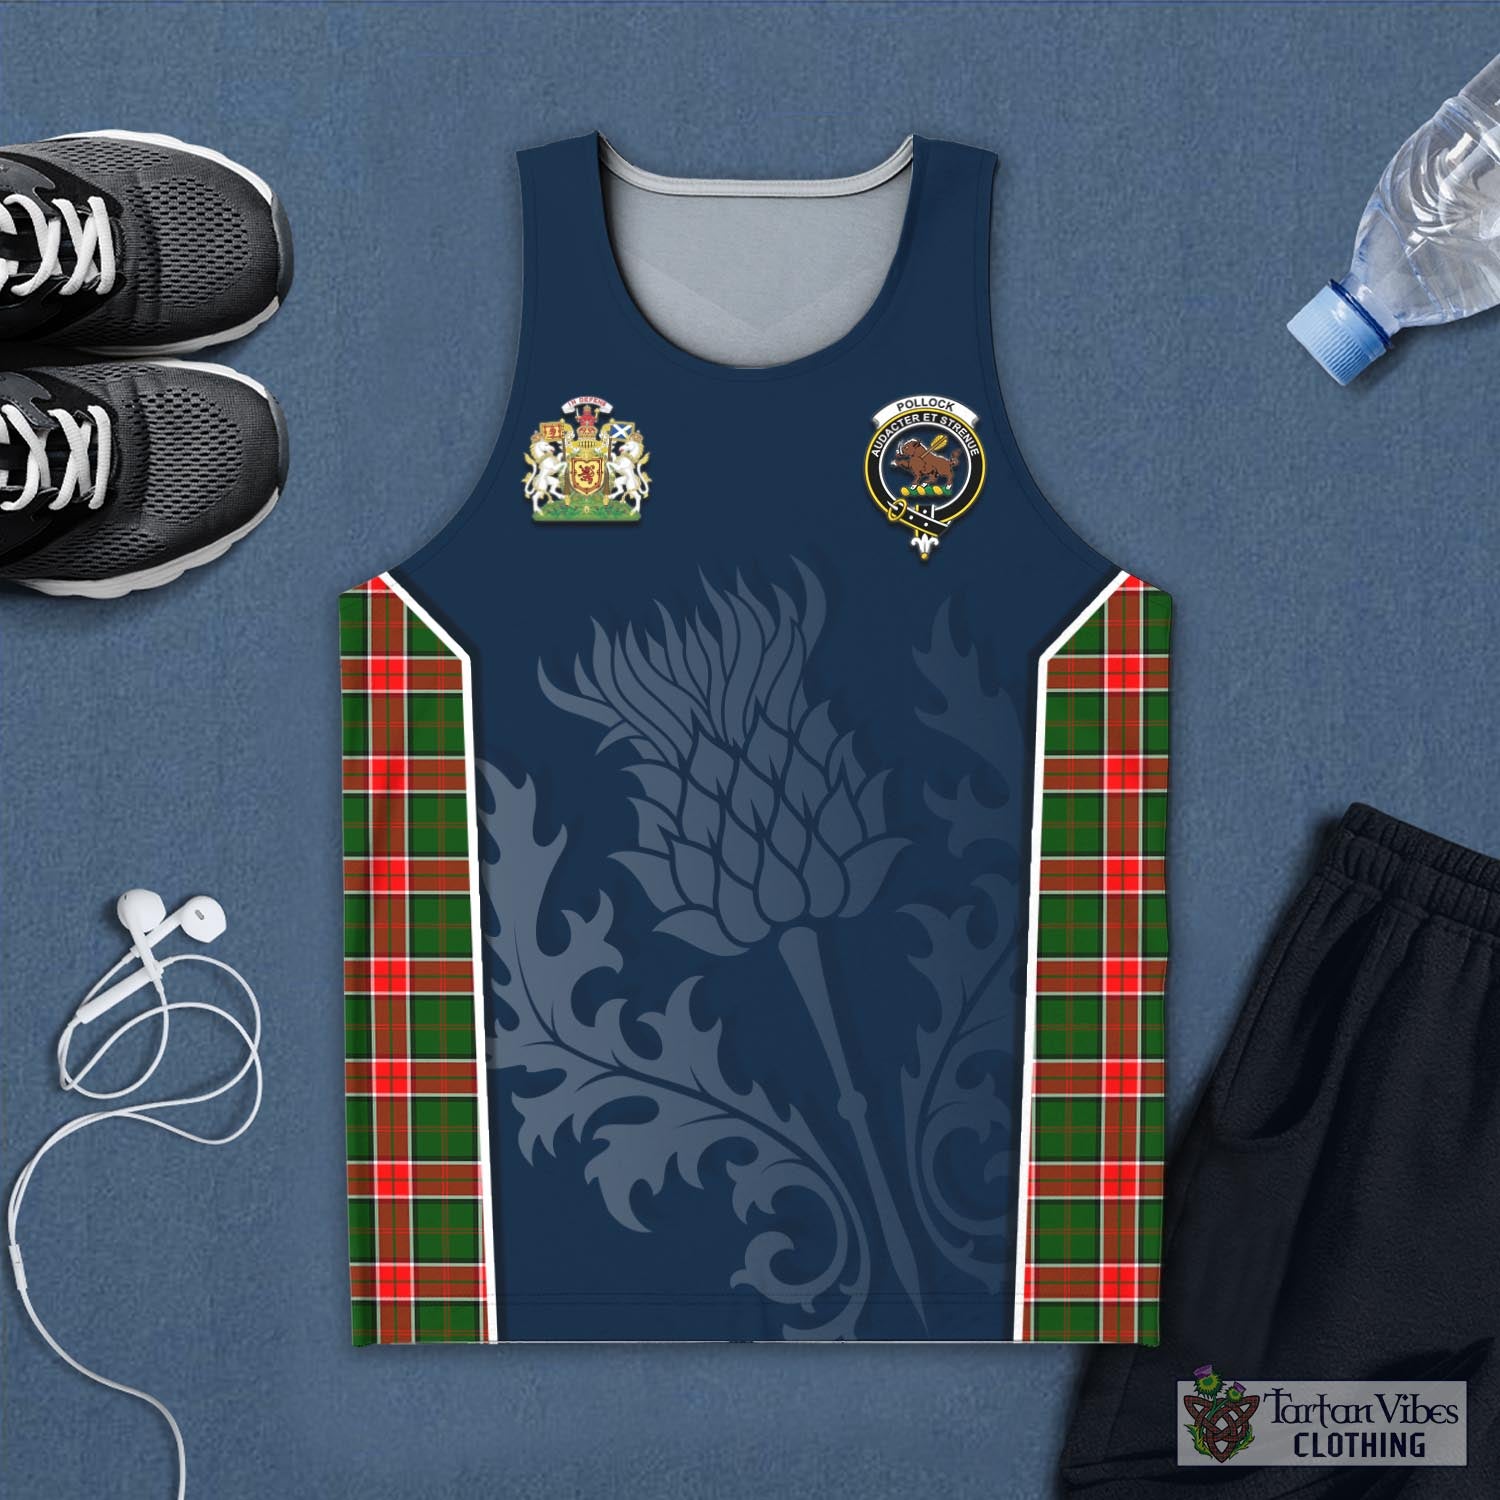 Tartan Vibes Clothing Pollock Modern Tartan Men's Tanks Top with Family Crest and Scottish Thistle Vibes Sport Style